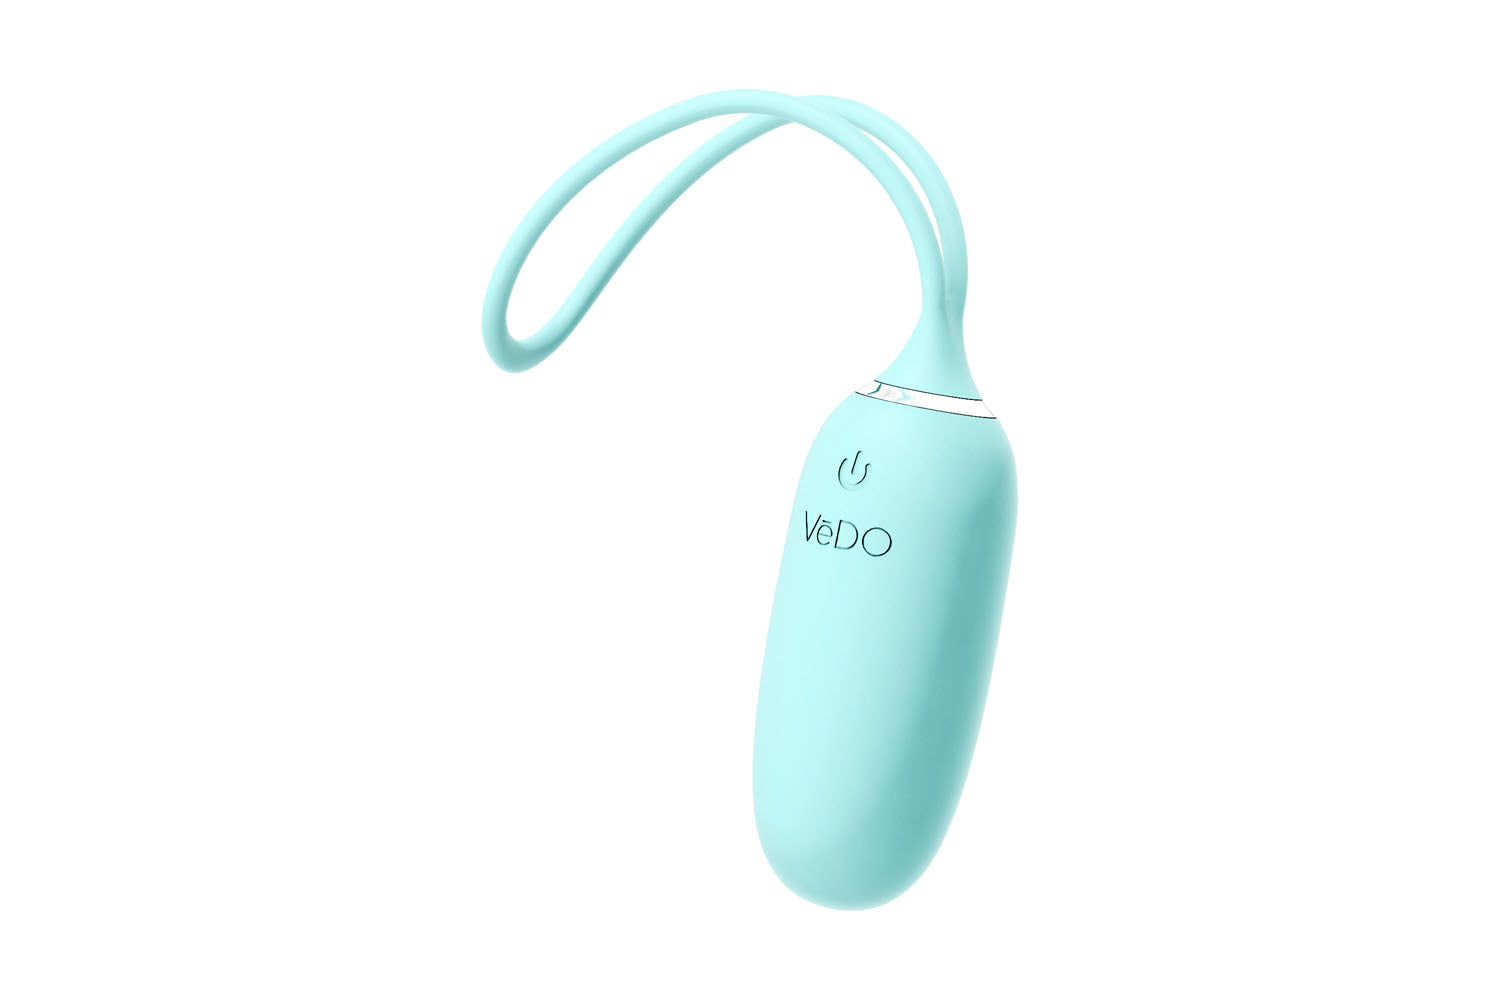 Kiwi Rechargeable Insertable Bullet - Tease Me Turquoise